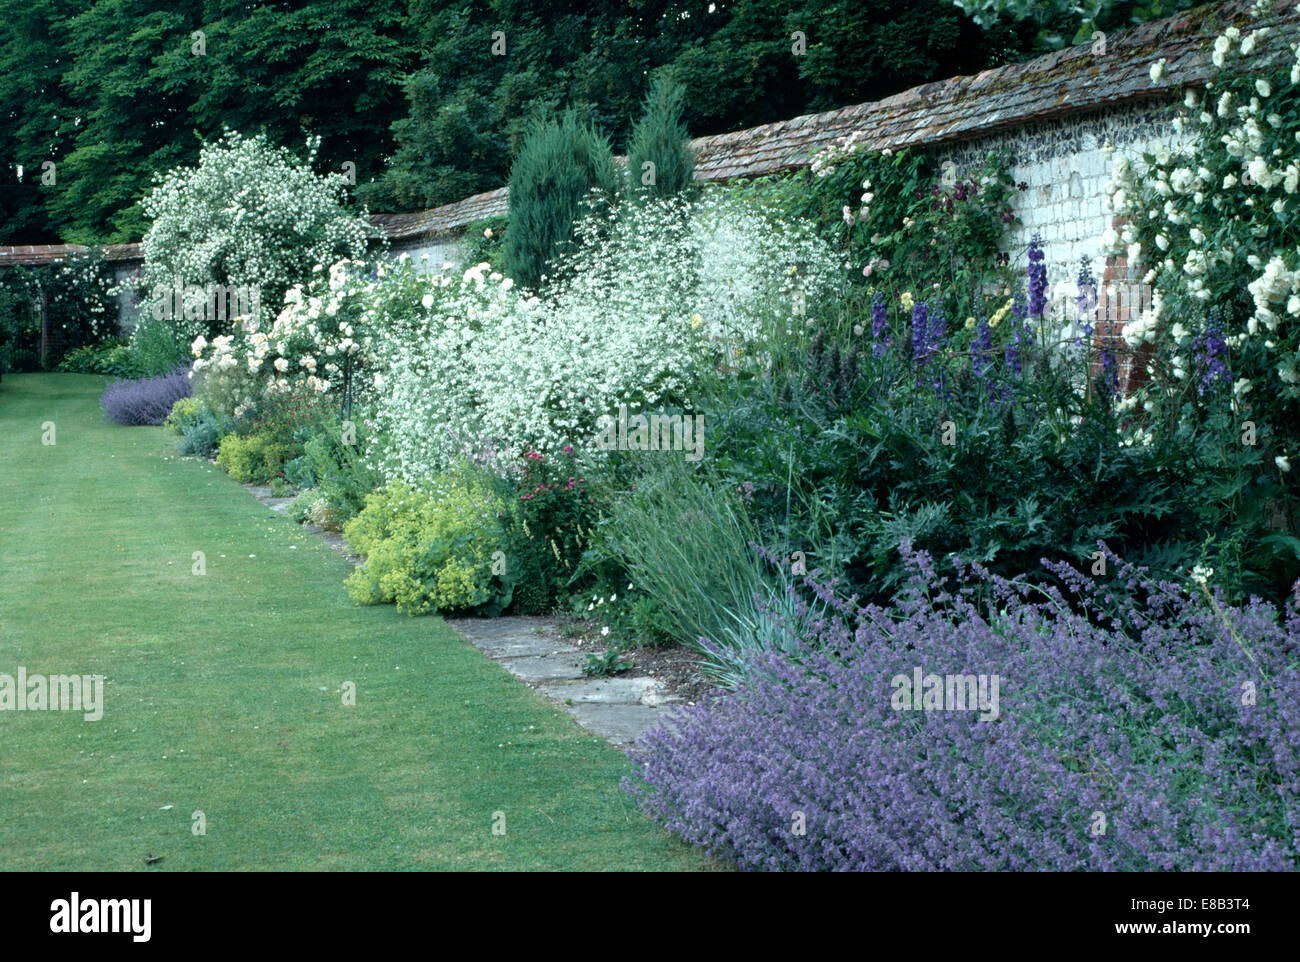 Blue lavender and white crambe in herbaceous border beside wide grass path in large, walled country garden Stock Photo